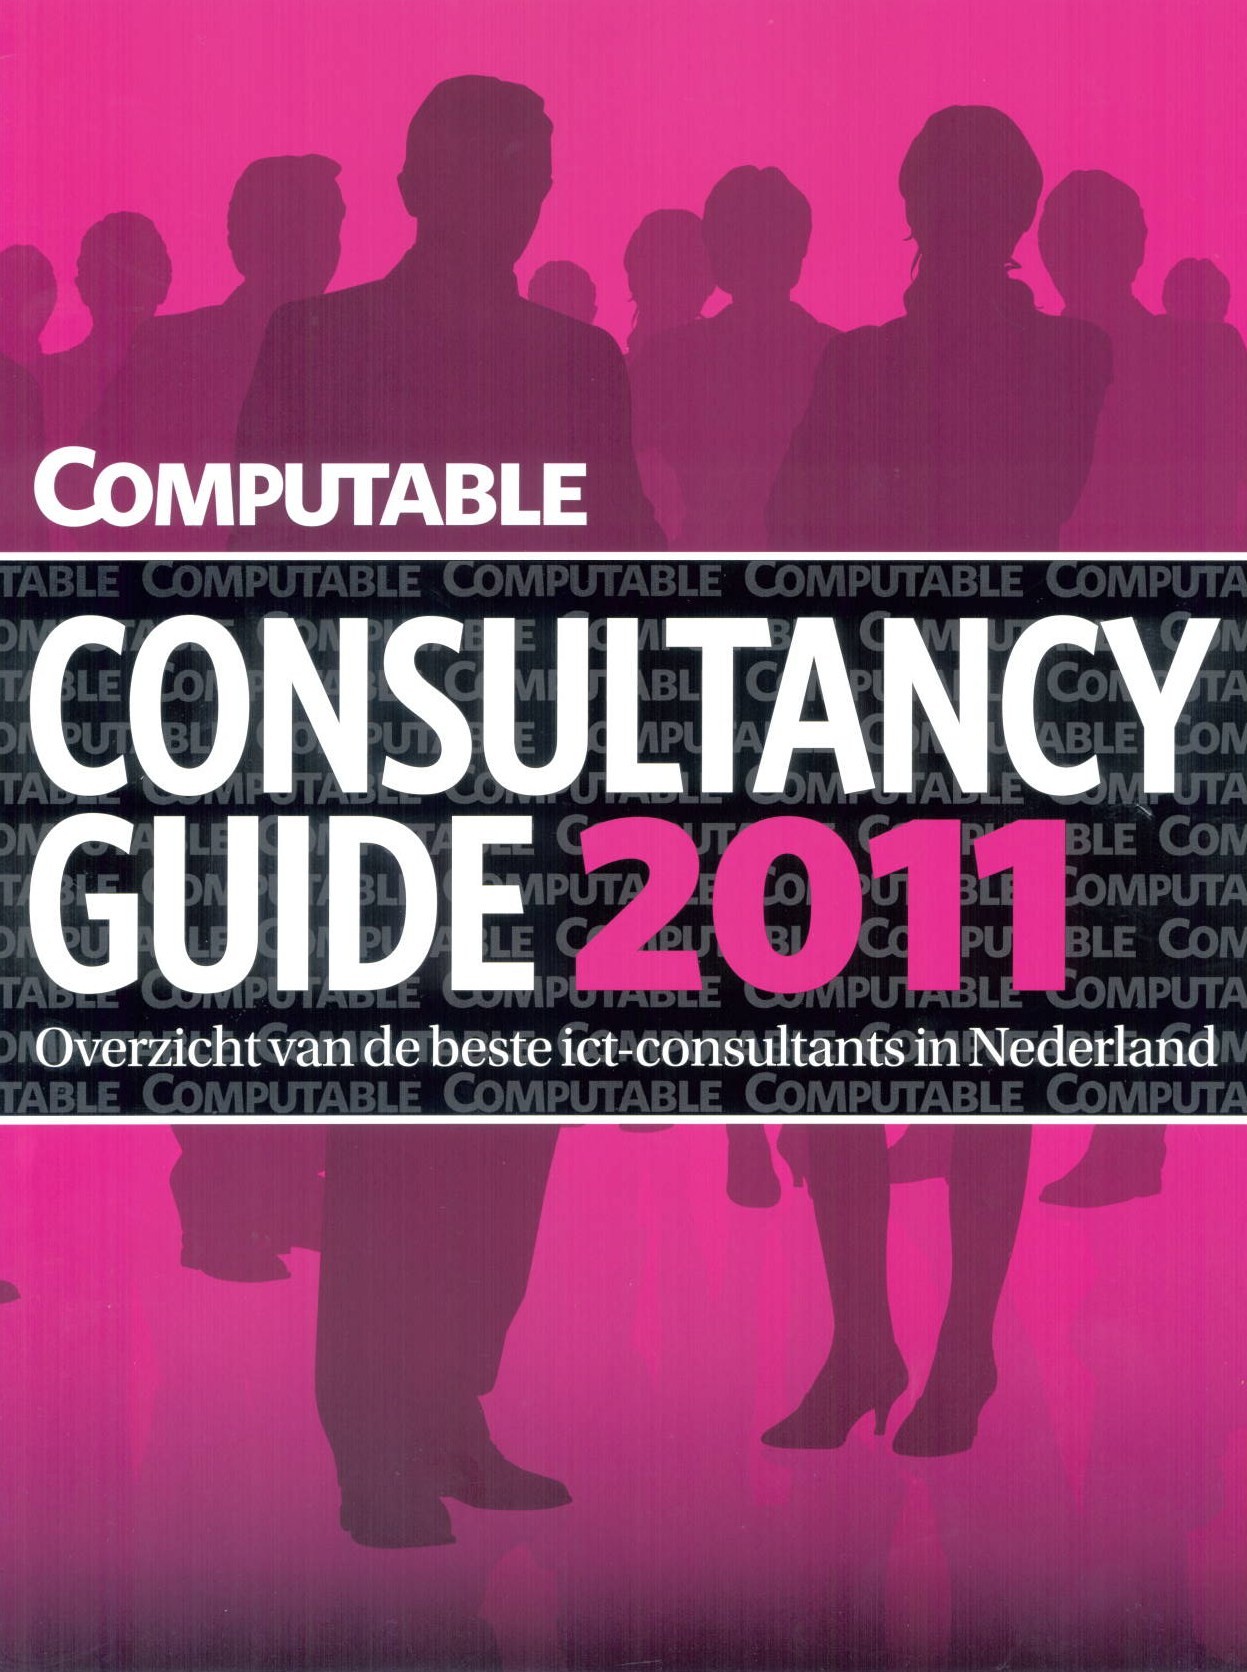 Computable ICT Consultancy Guide – 2011